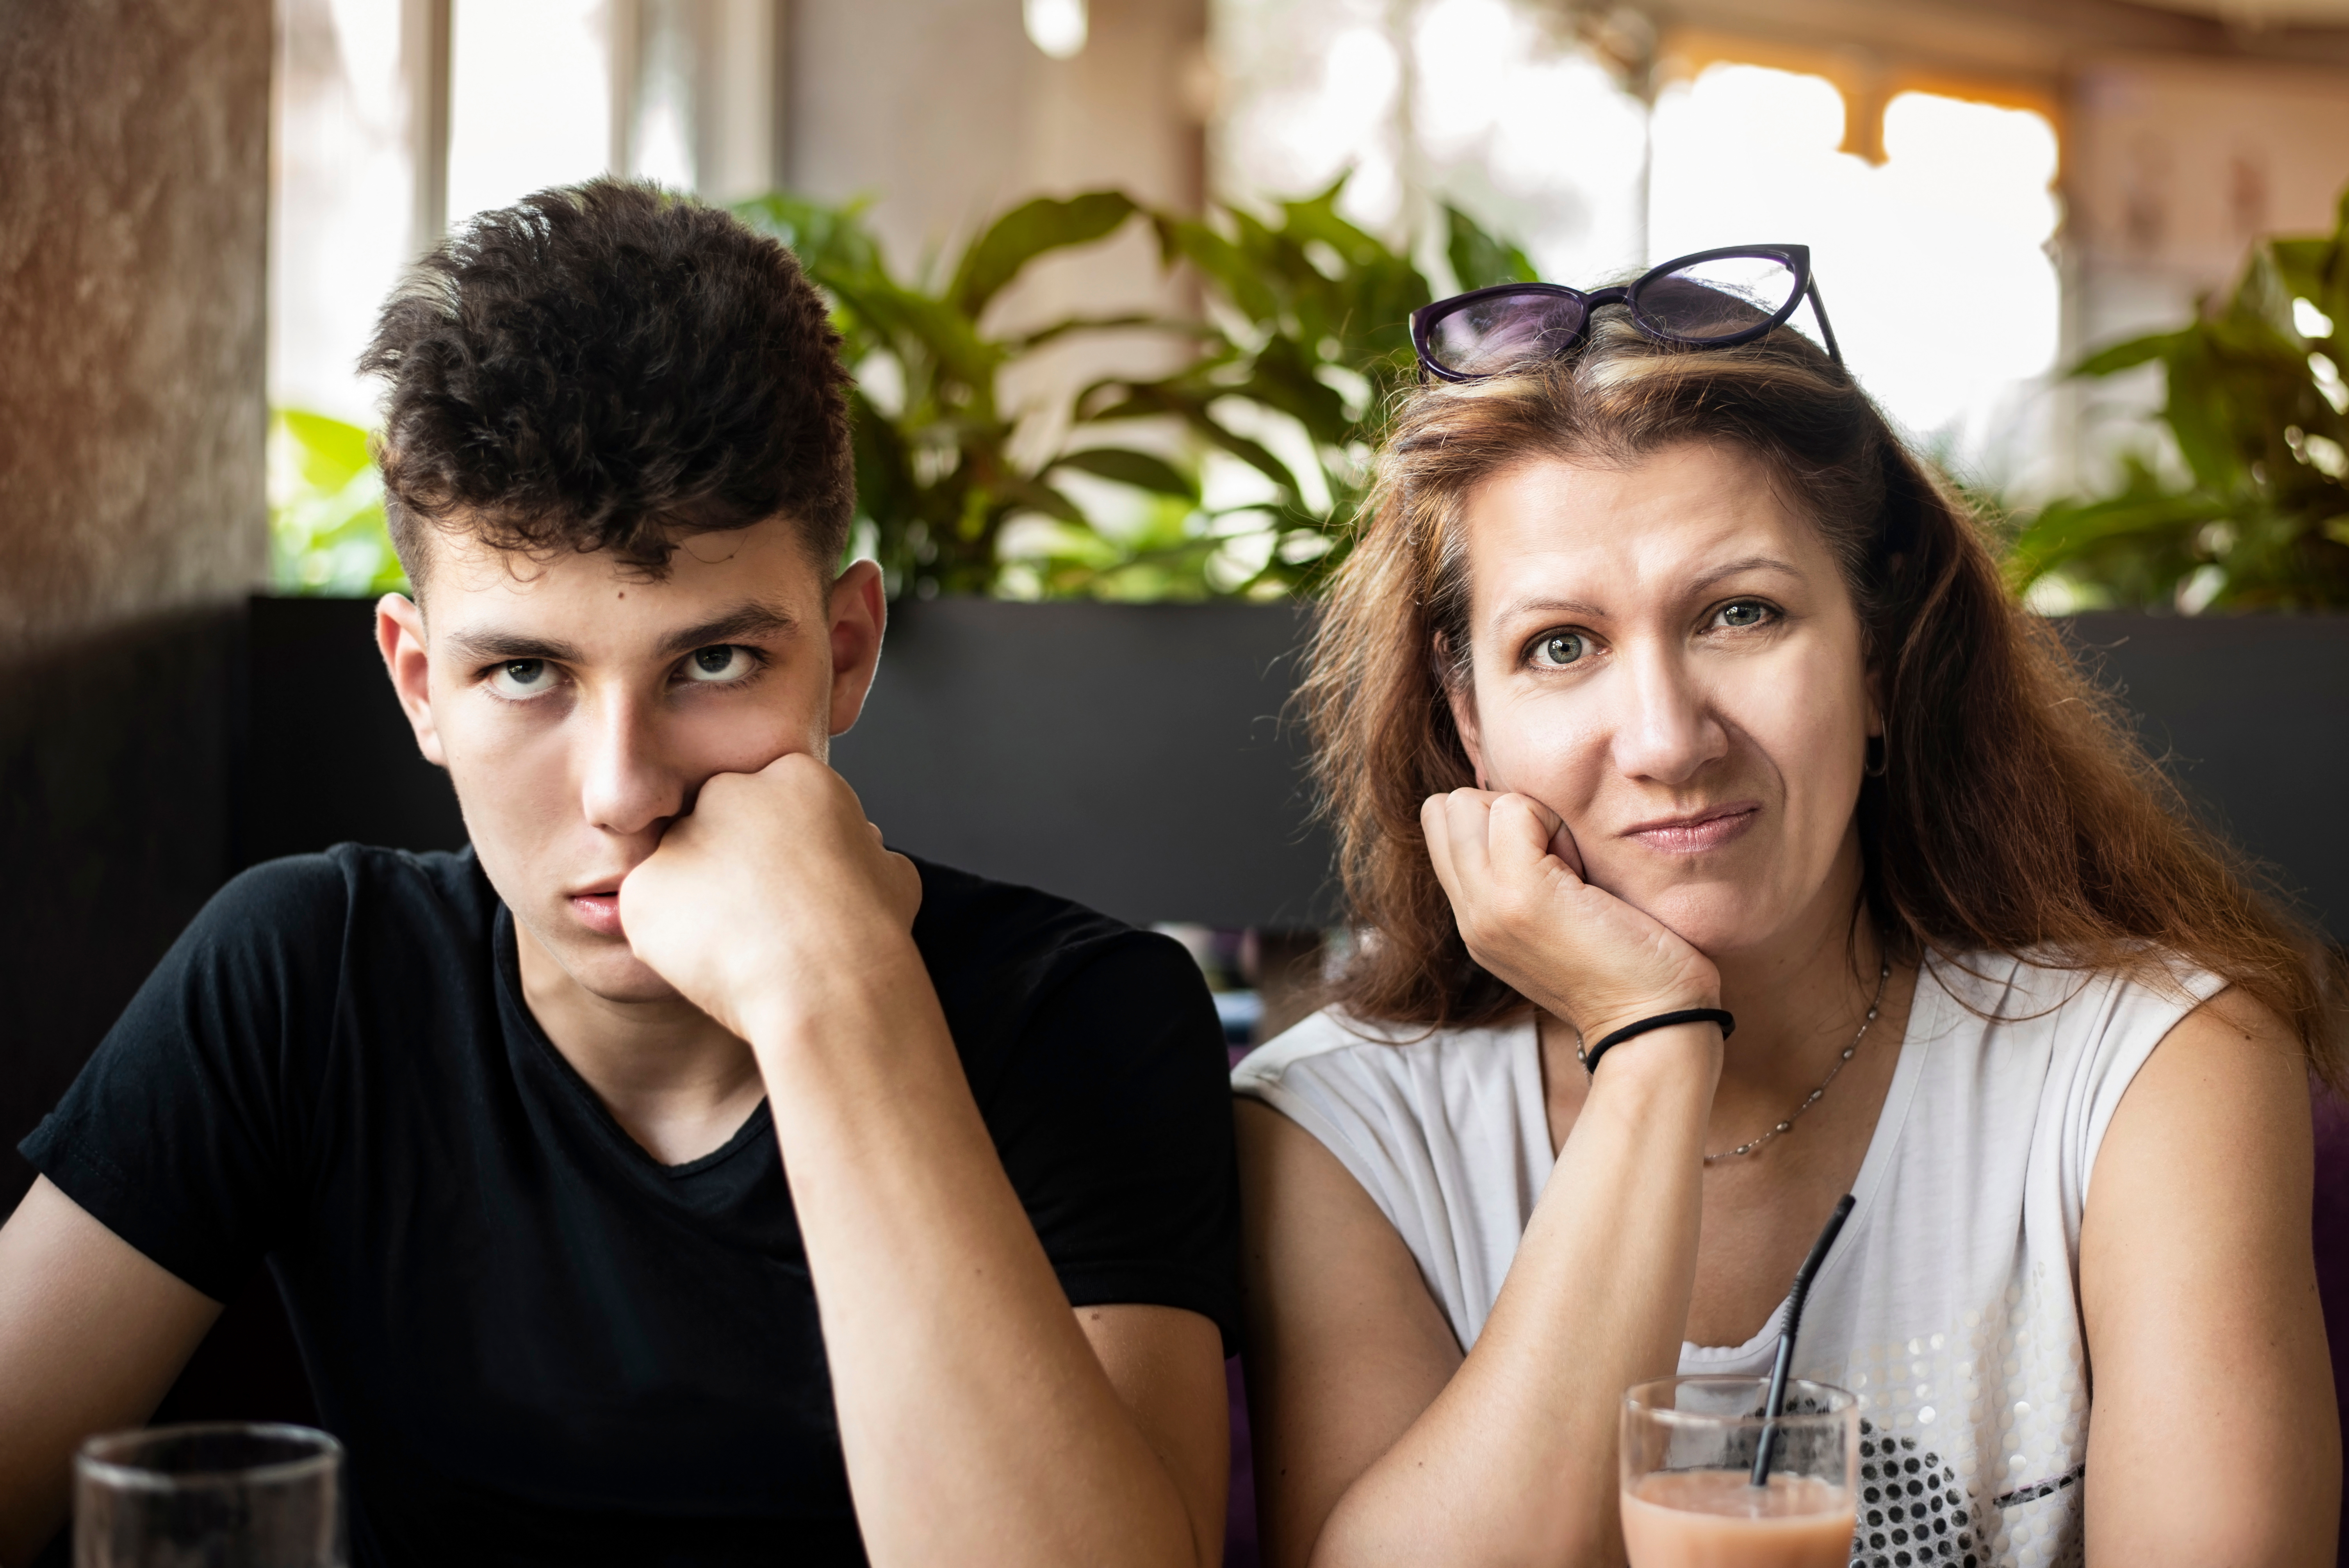 A mother and son looking annoyed | Source: Shutterstock